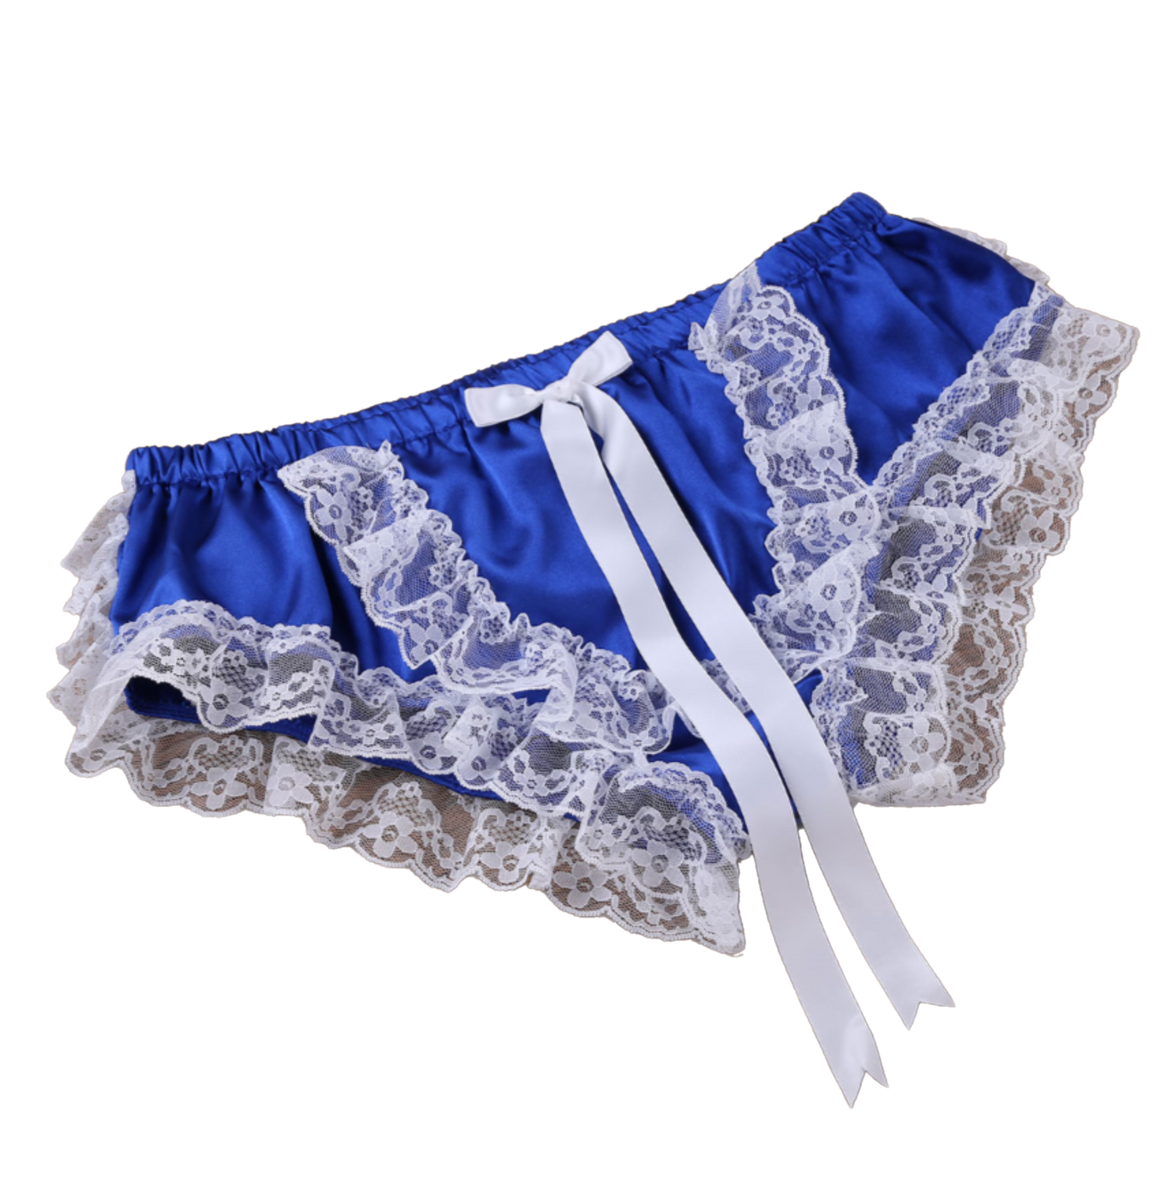 Satin Ruffle Lace Panties House Of Chastity